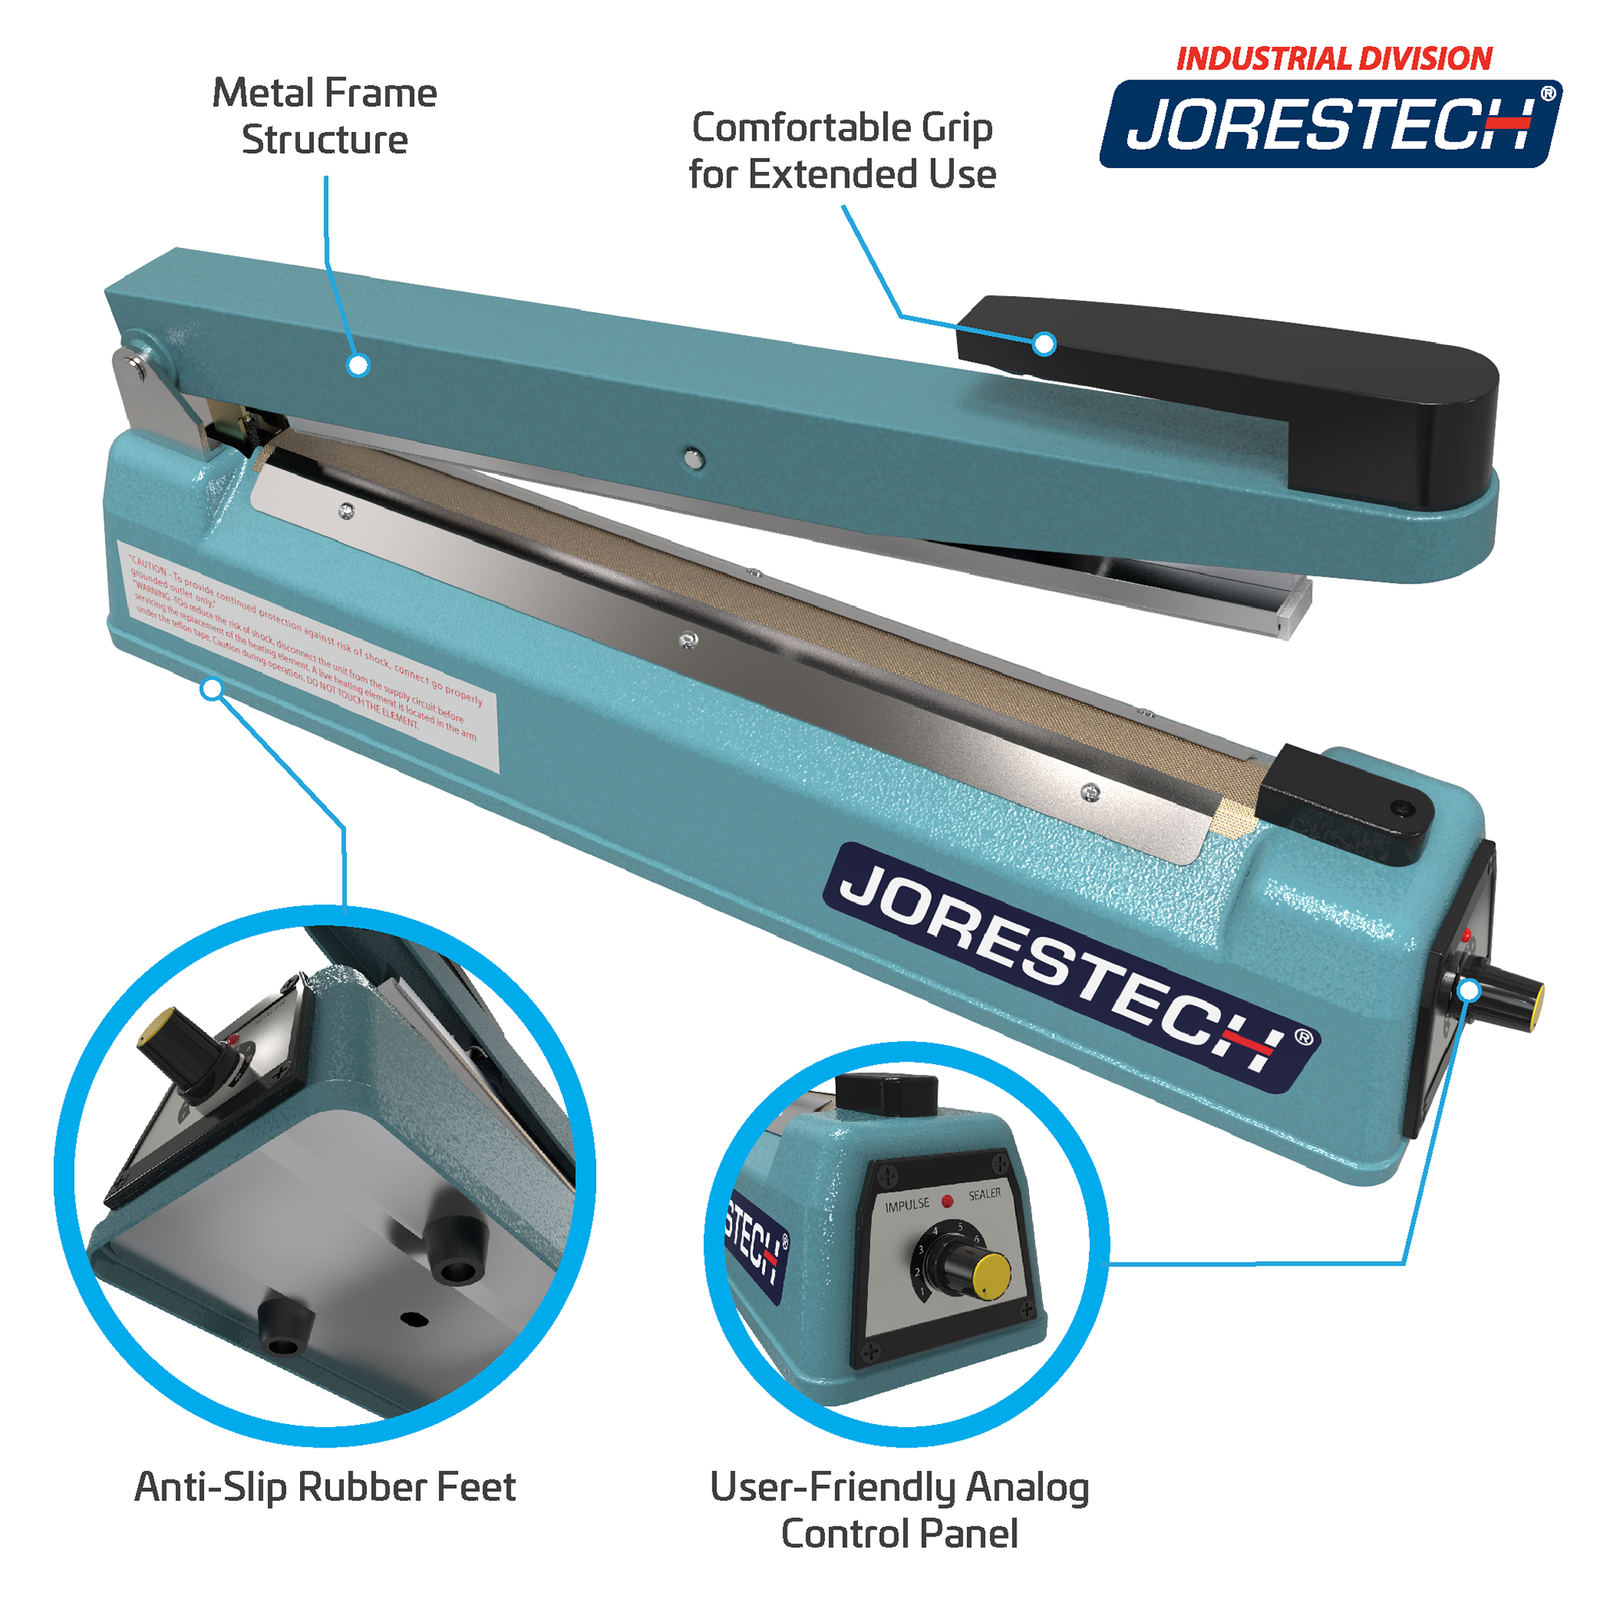 Blue manual impulse bag sealer by JORES TECHNOLOGIES®. Features include, Metal Frame Structure, Comfortable Grip for Extended Use, Anti-slip Rubber Feet, and User Friendly Analog Control Panel. Close-ups of rubber feet and control panel.